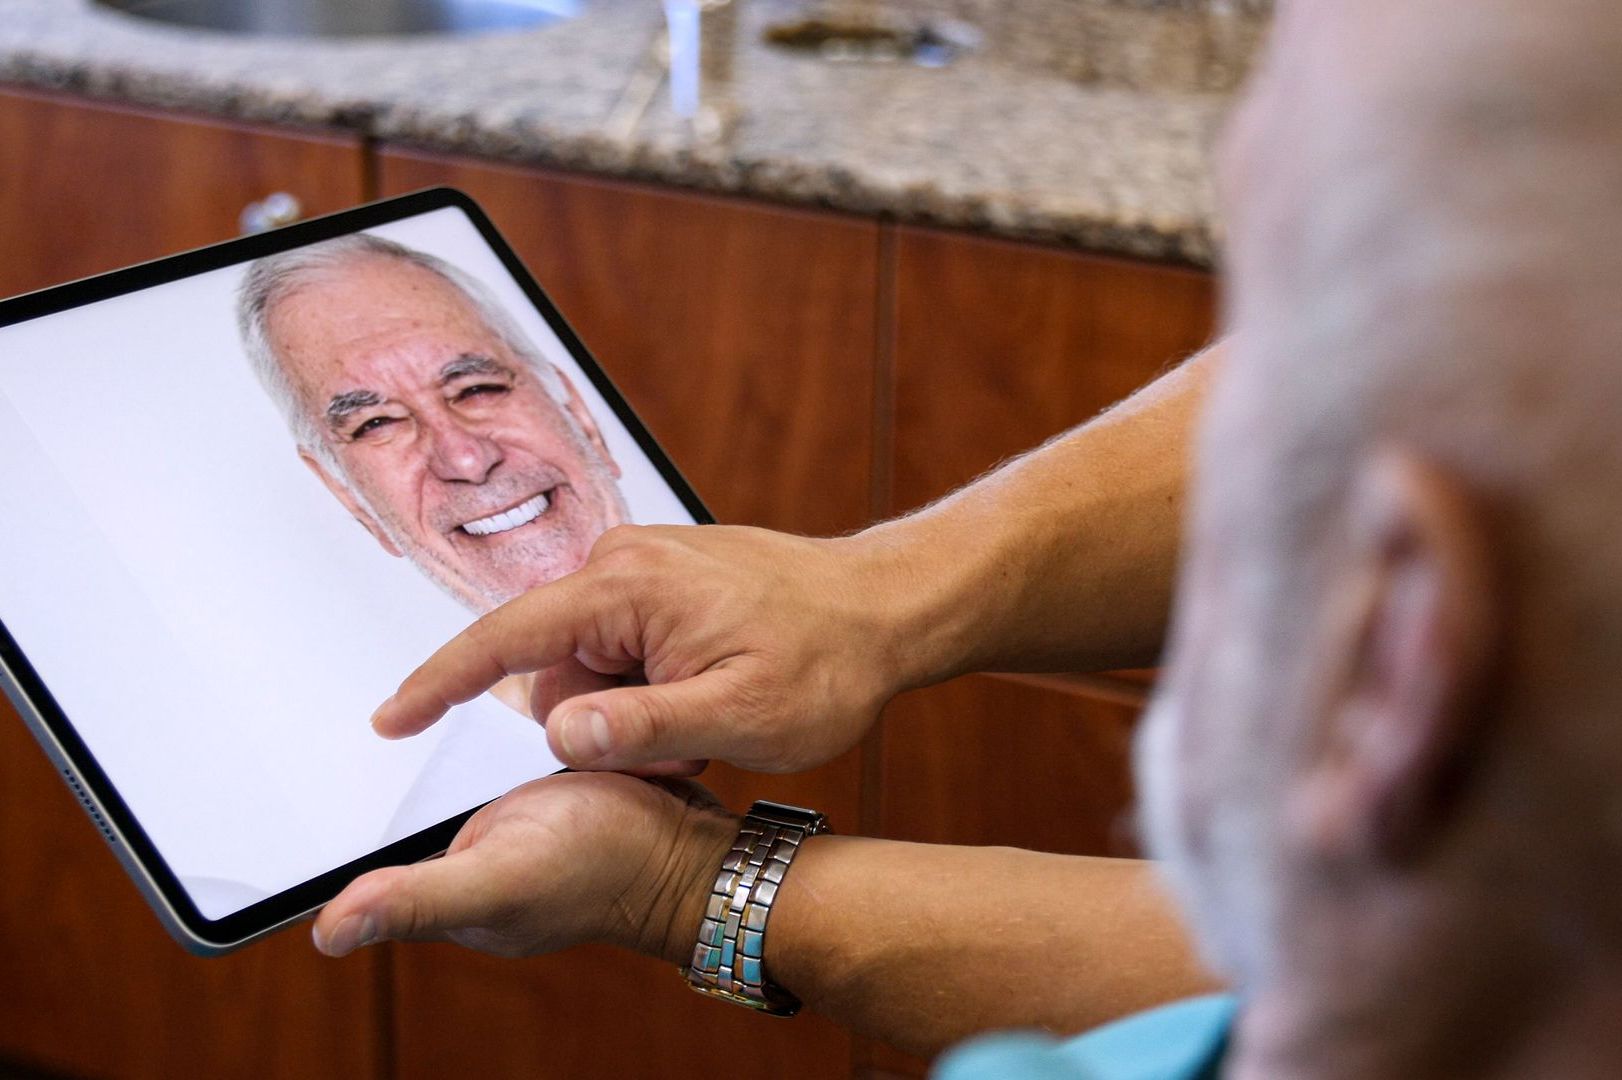 smiling man on iPad | Cosmetic dentist in Monroe and Highland Park NJ